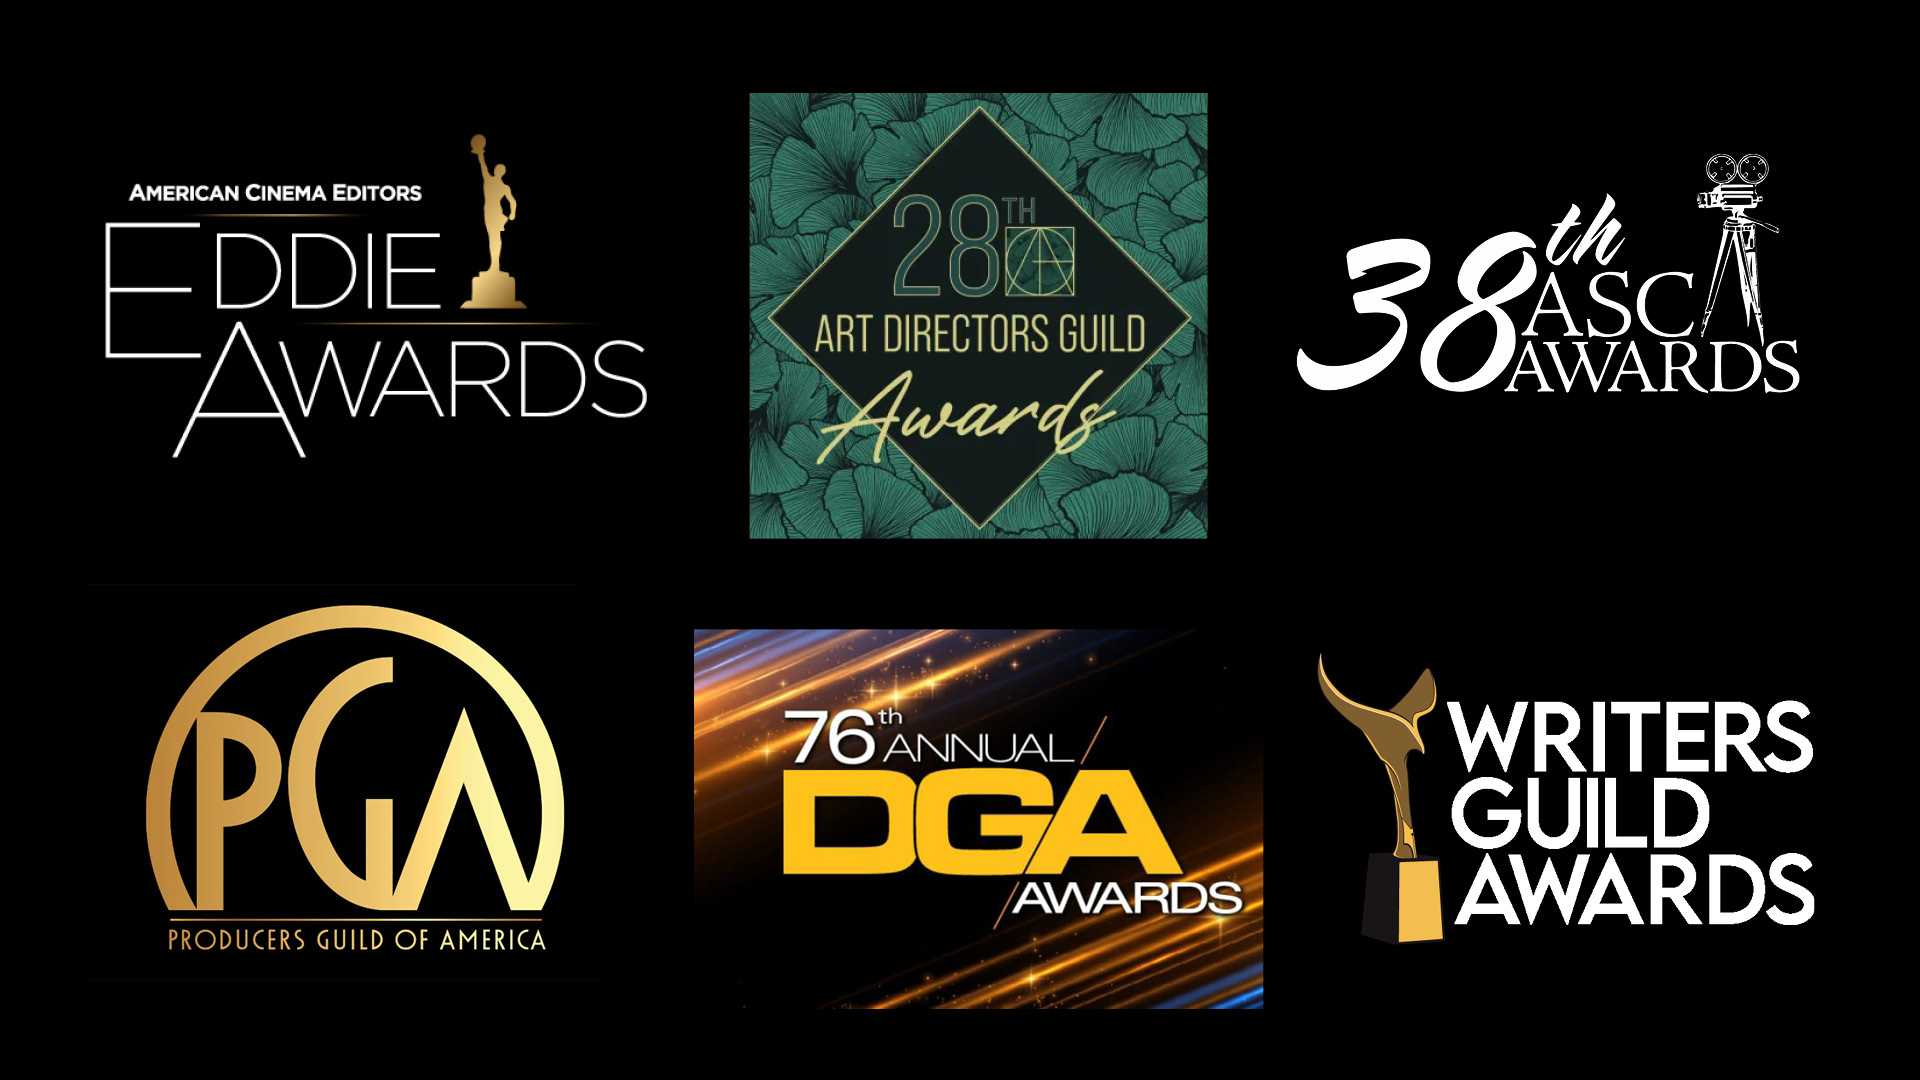 The image shows six logos against a black background. Top row (l to r): ACE Eddie Awards logo, Art Director Guild Awards logo, ASC Awards logo. Bottom row: (l to r) PGA logo, DGA Awards logo, Writer's Guild Awards logo.